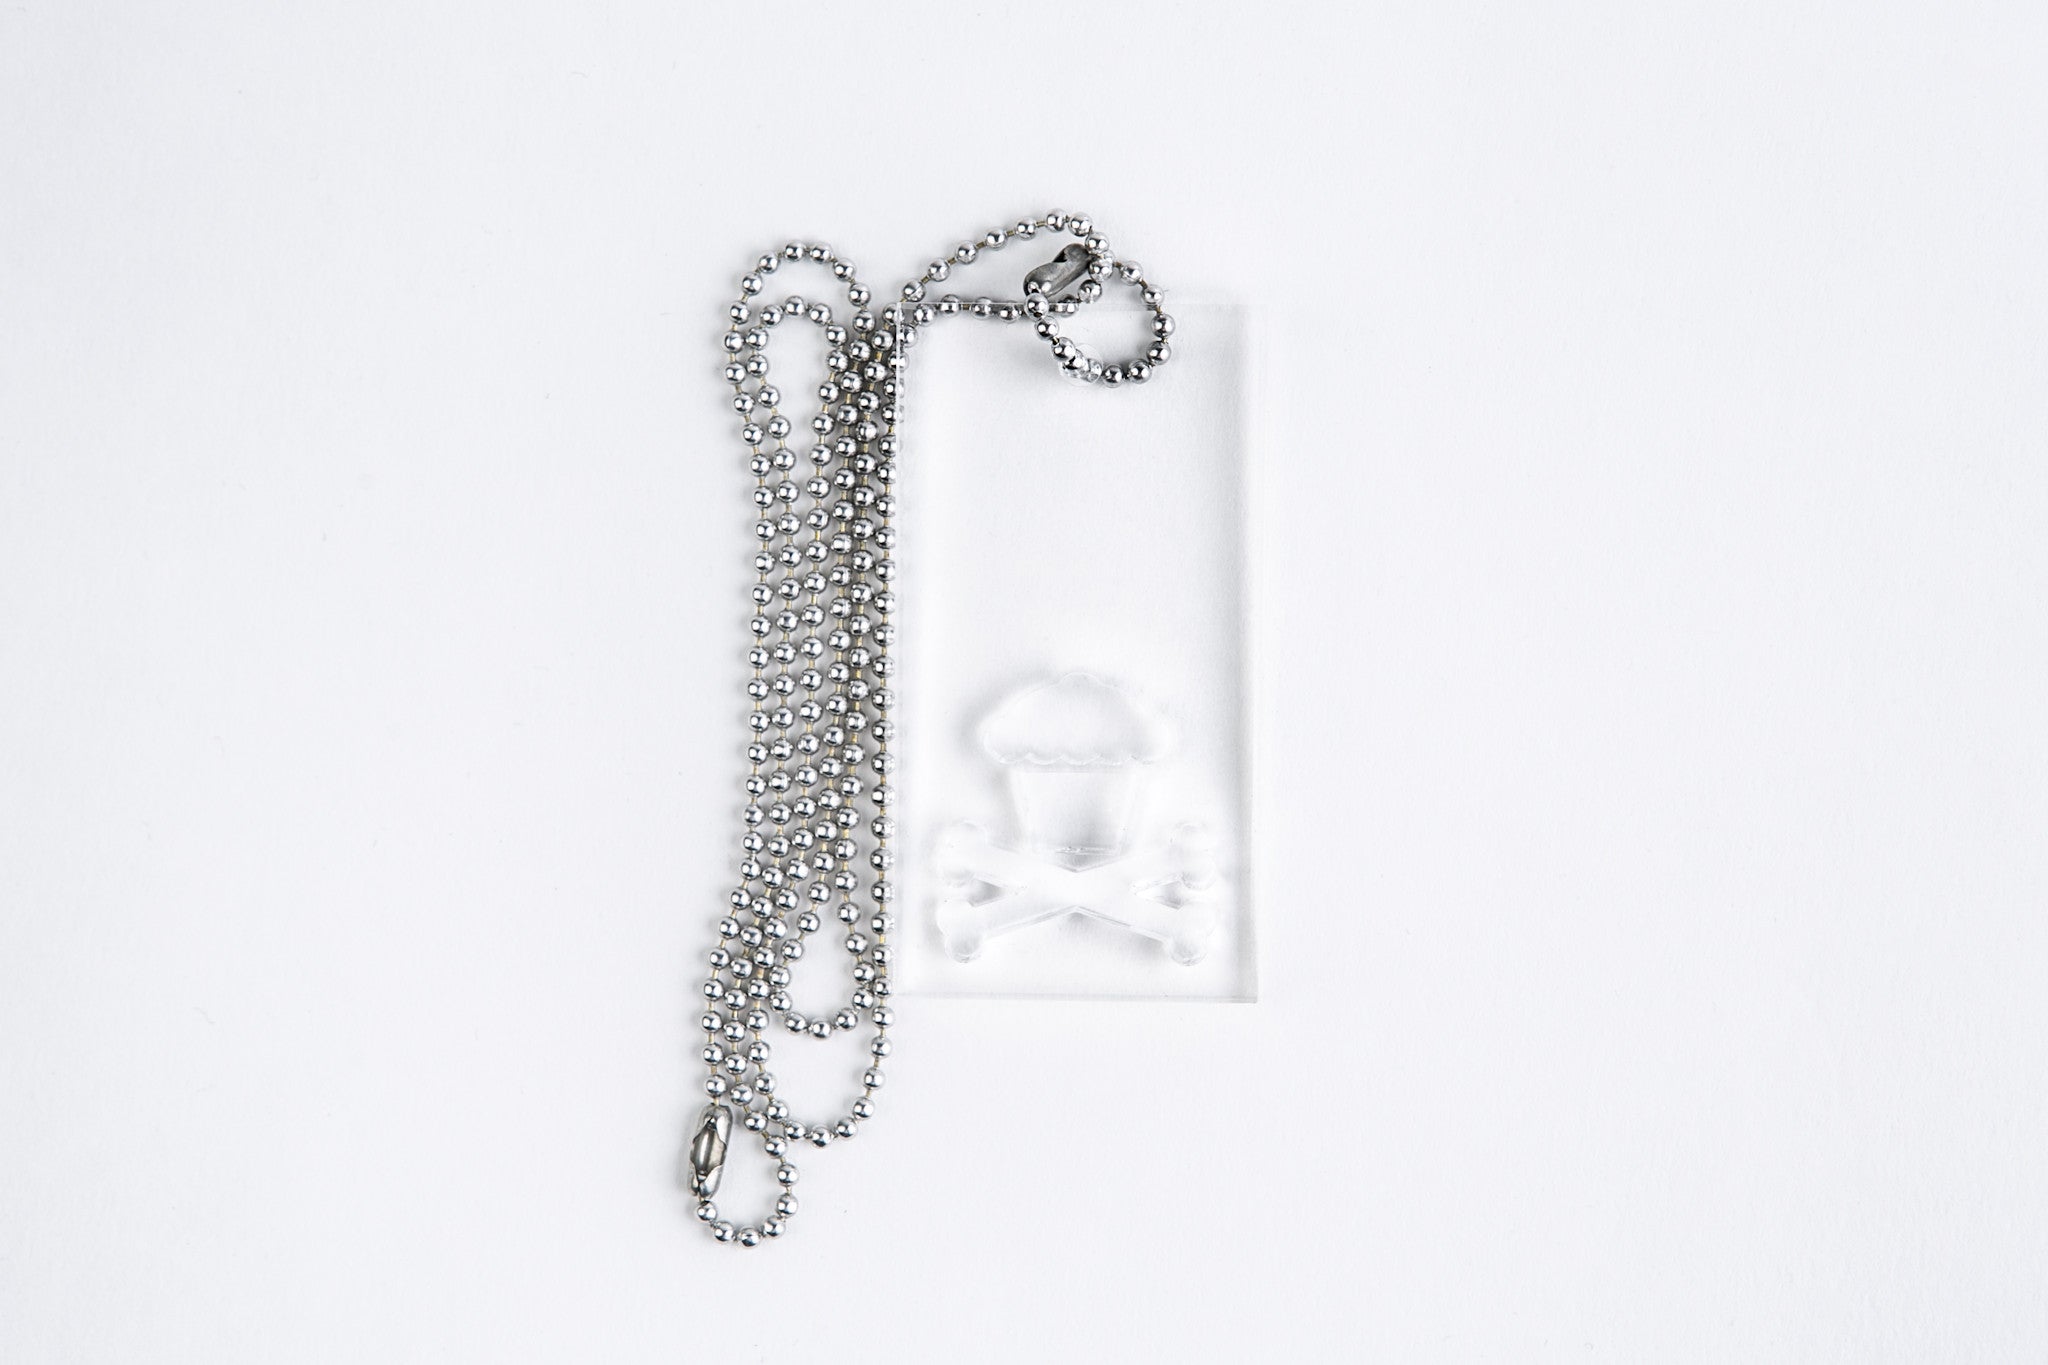 [Release May 17, 2013] Jc-acrylic_crossbones_necklace-01